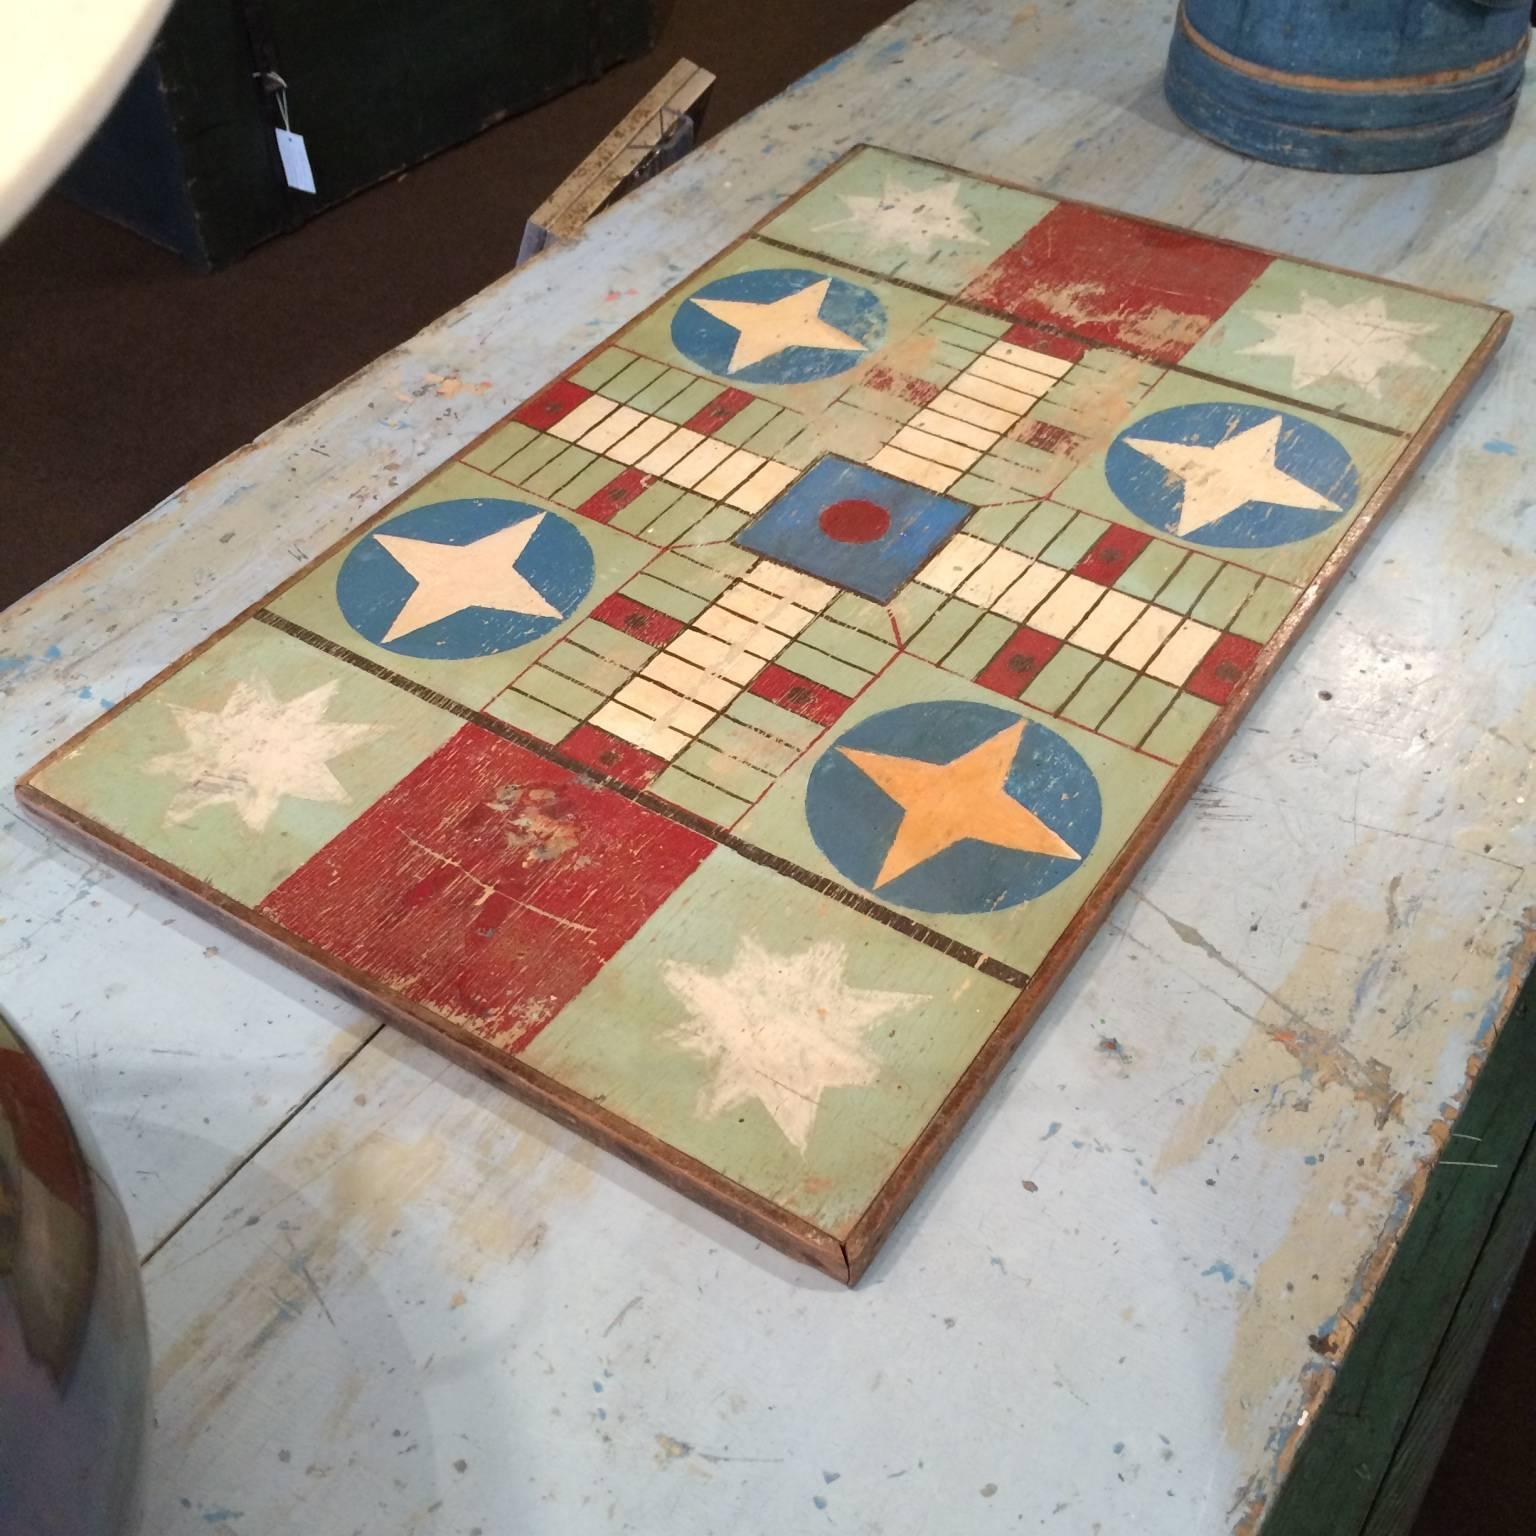 North American Double-Sided Gameboard with Parcheesi and Draughts